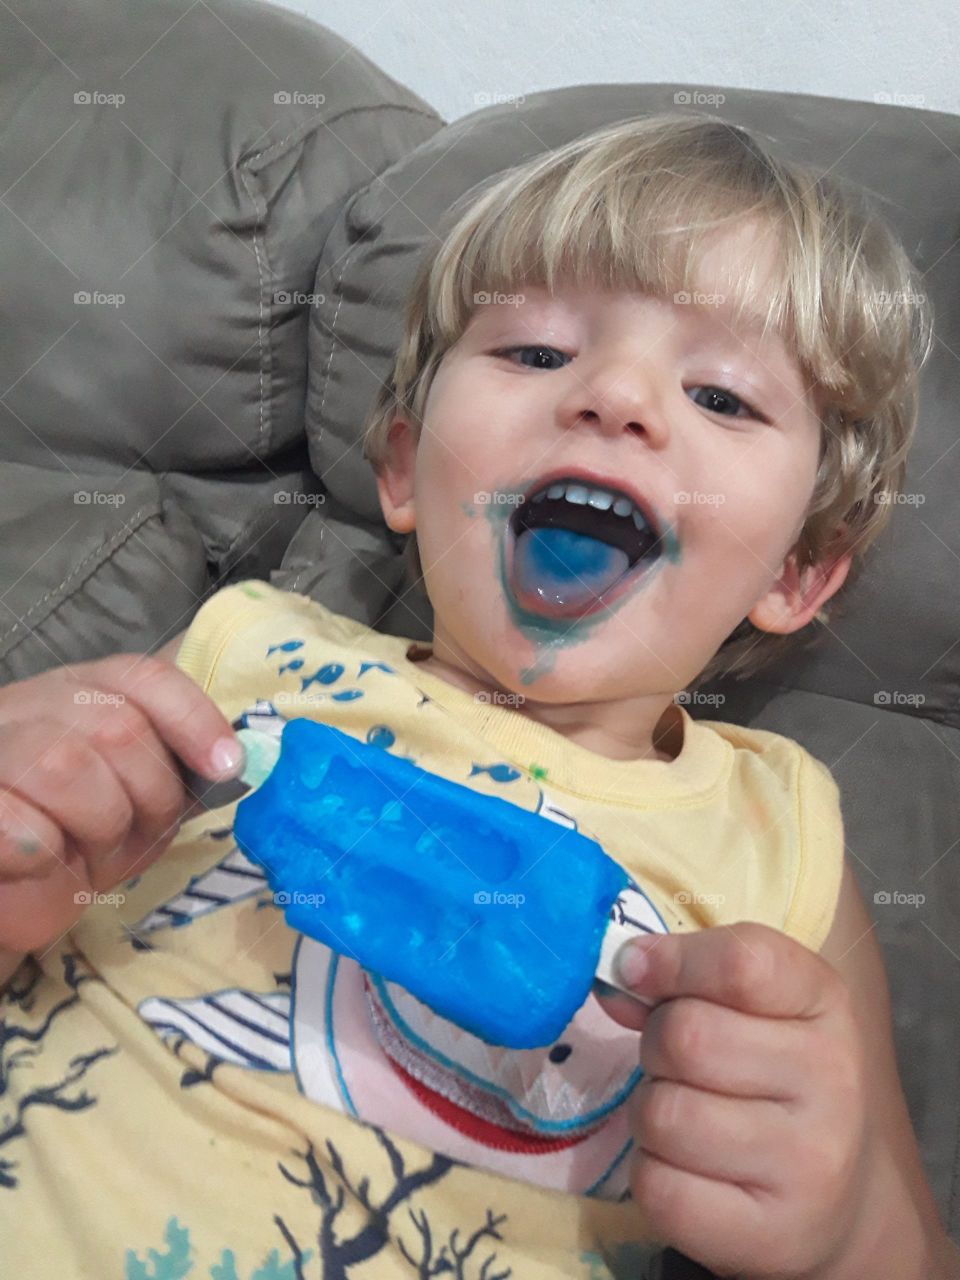 child sucking a blue popsicle happy